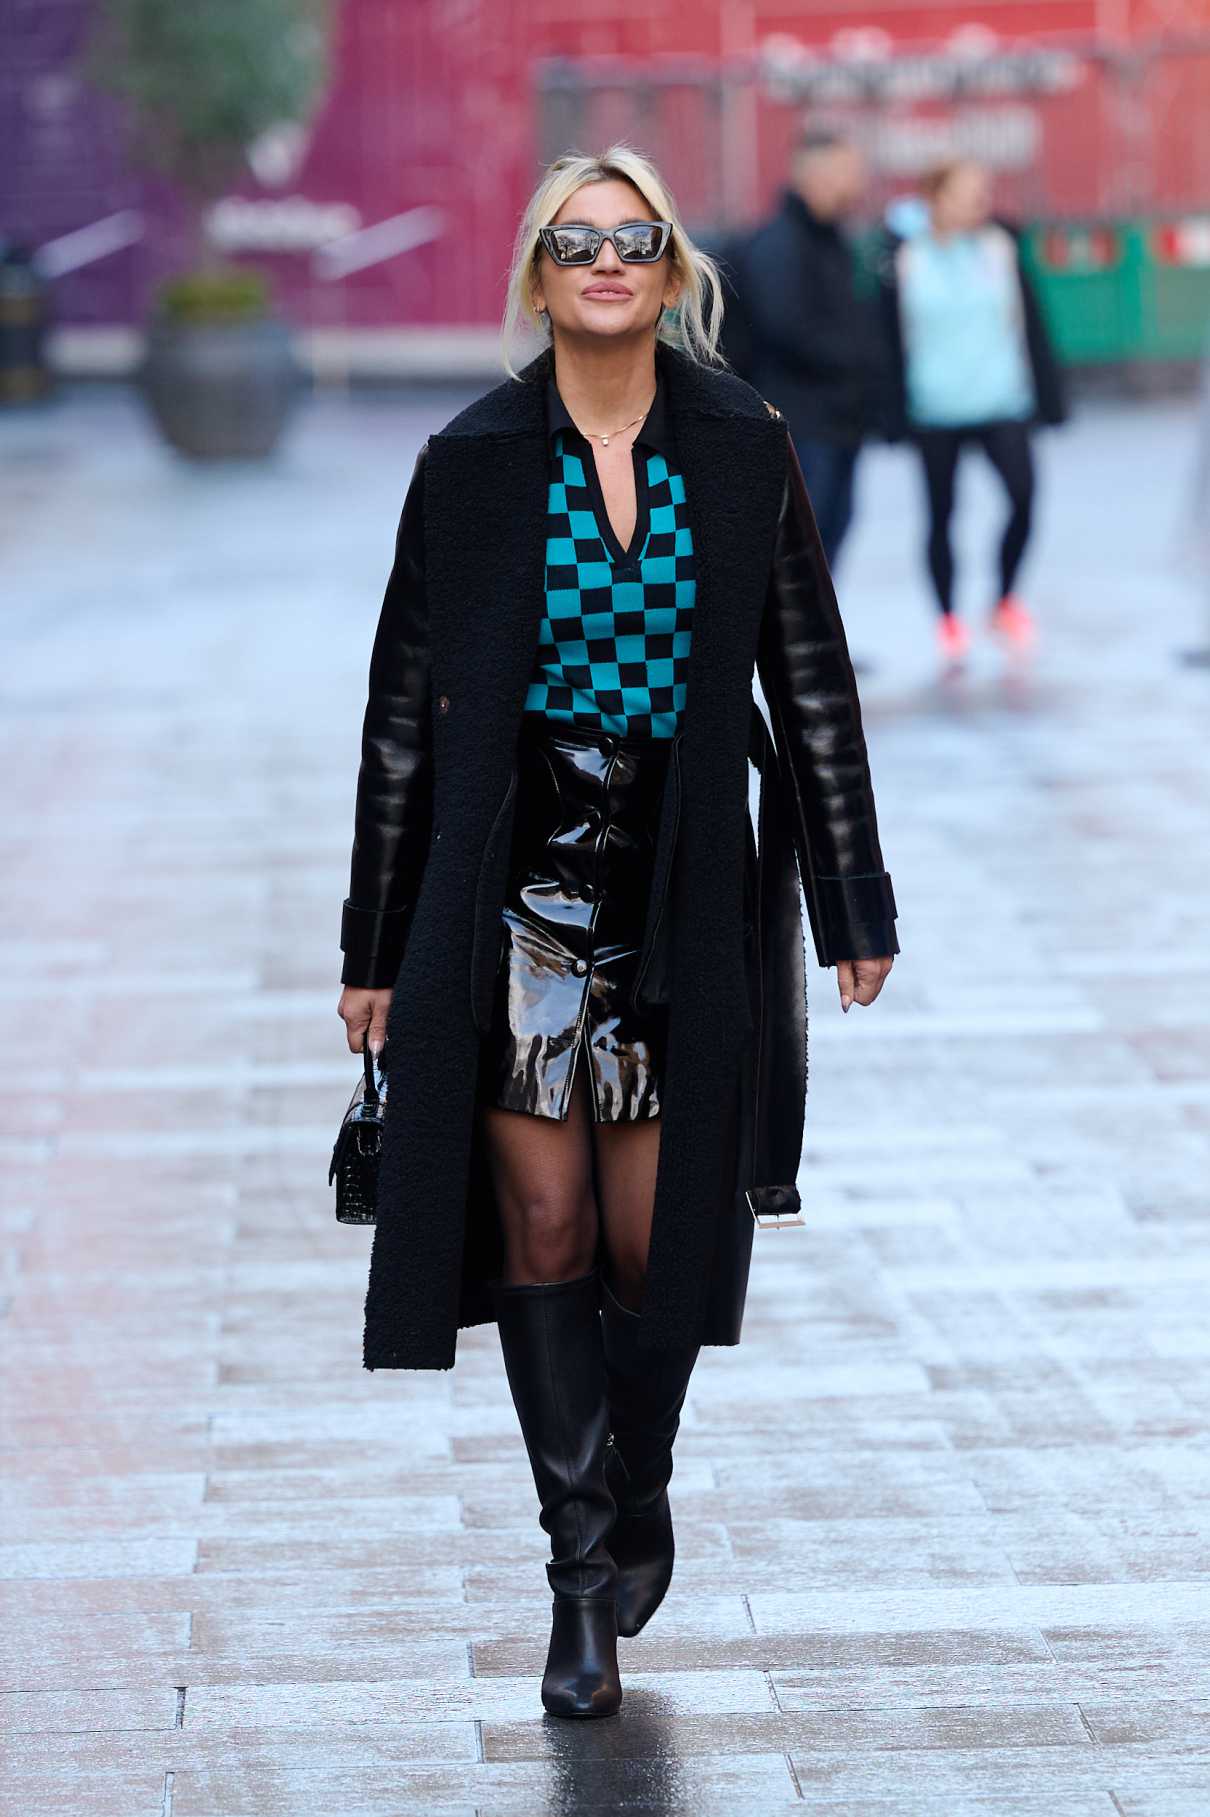 Ashley Roberts in a Black Leather Coat